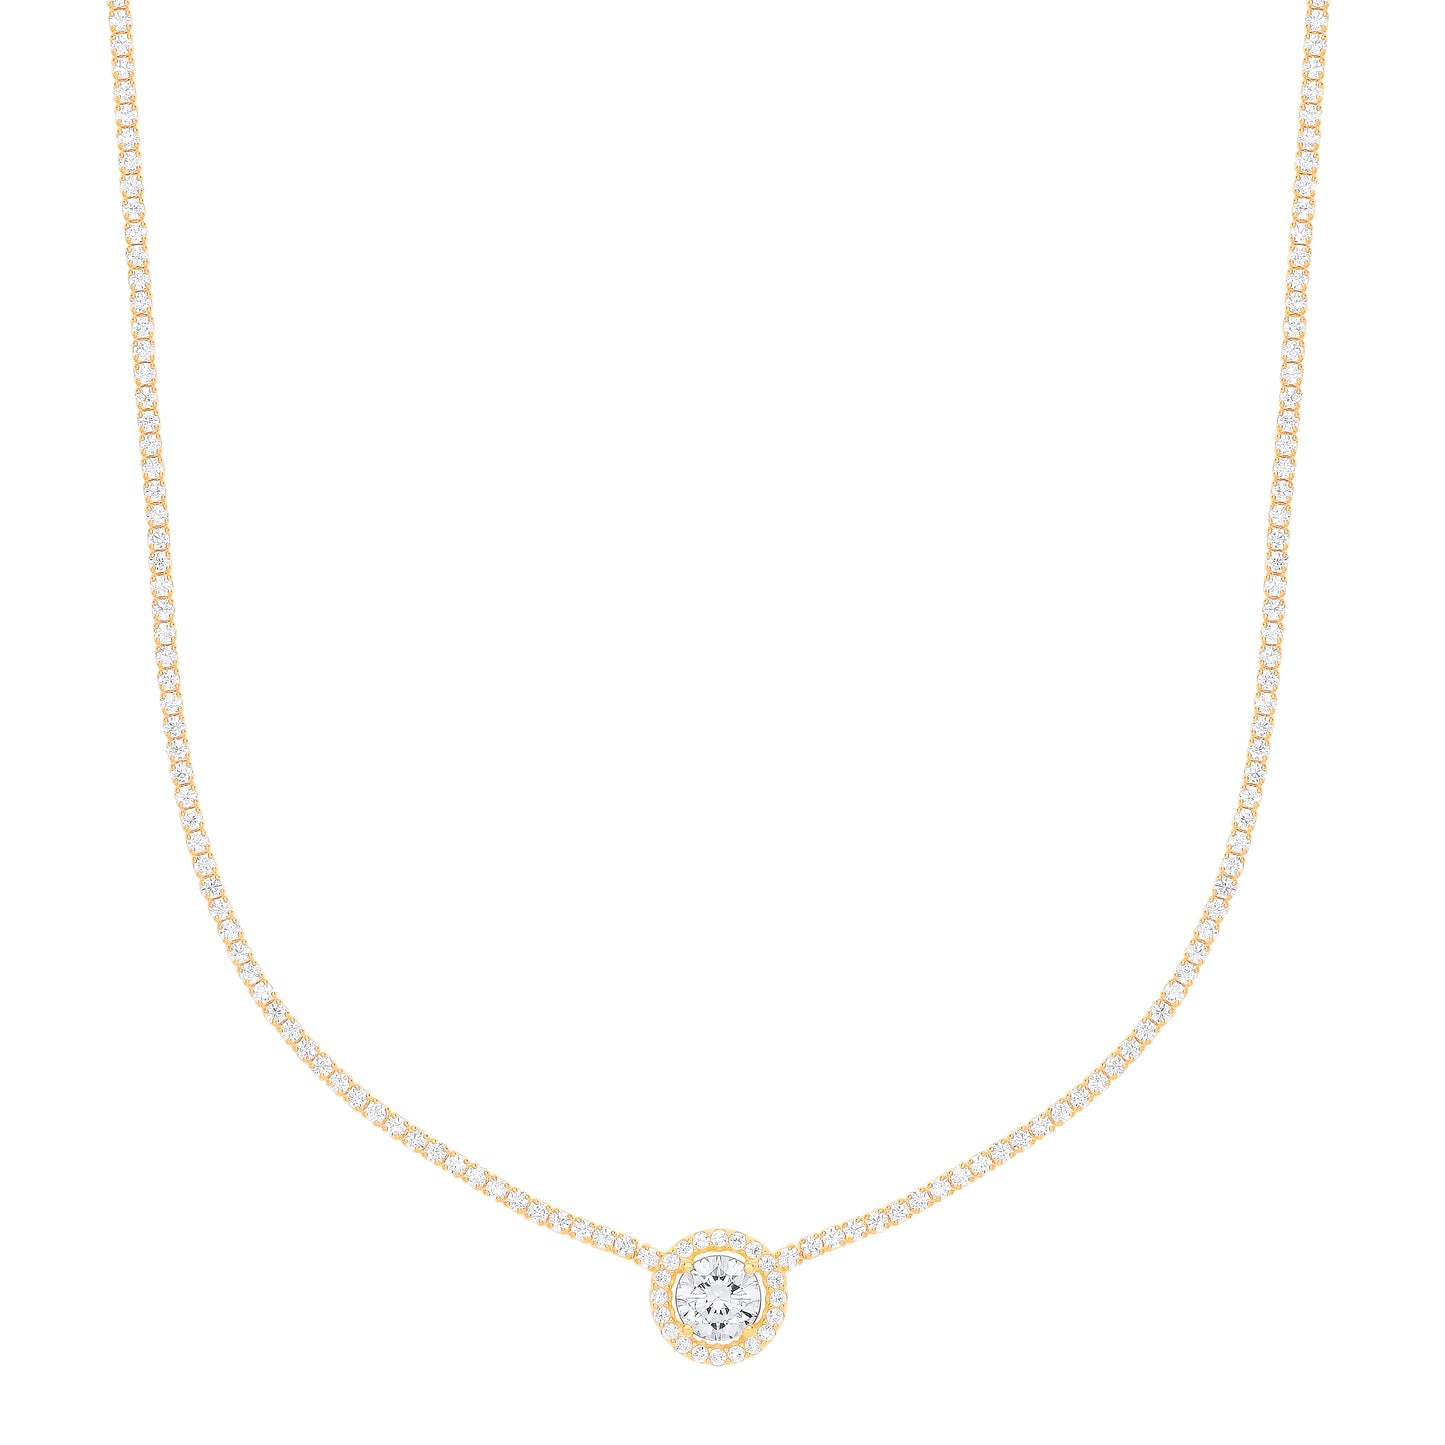 Gilded Silver  Round Solitaire Halo Cluster Tennis Necklace - GVK402